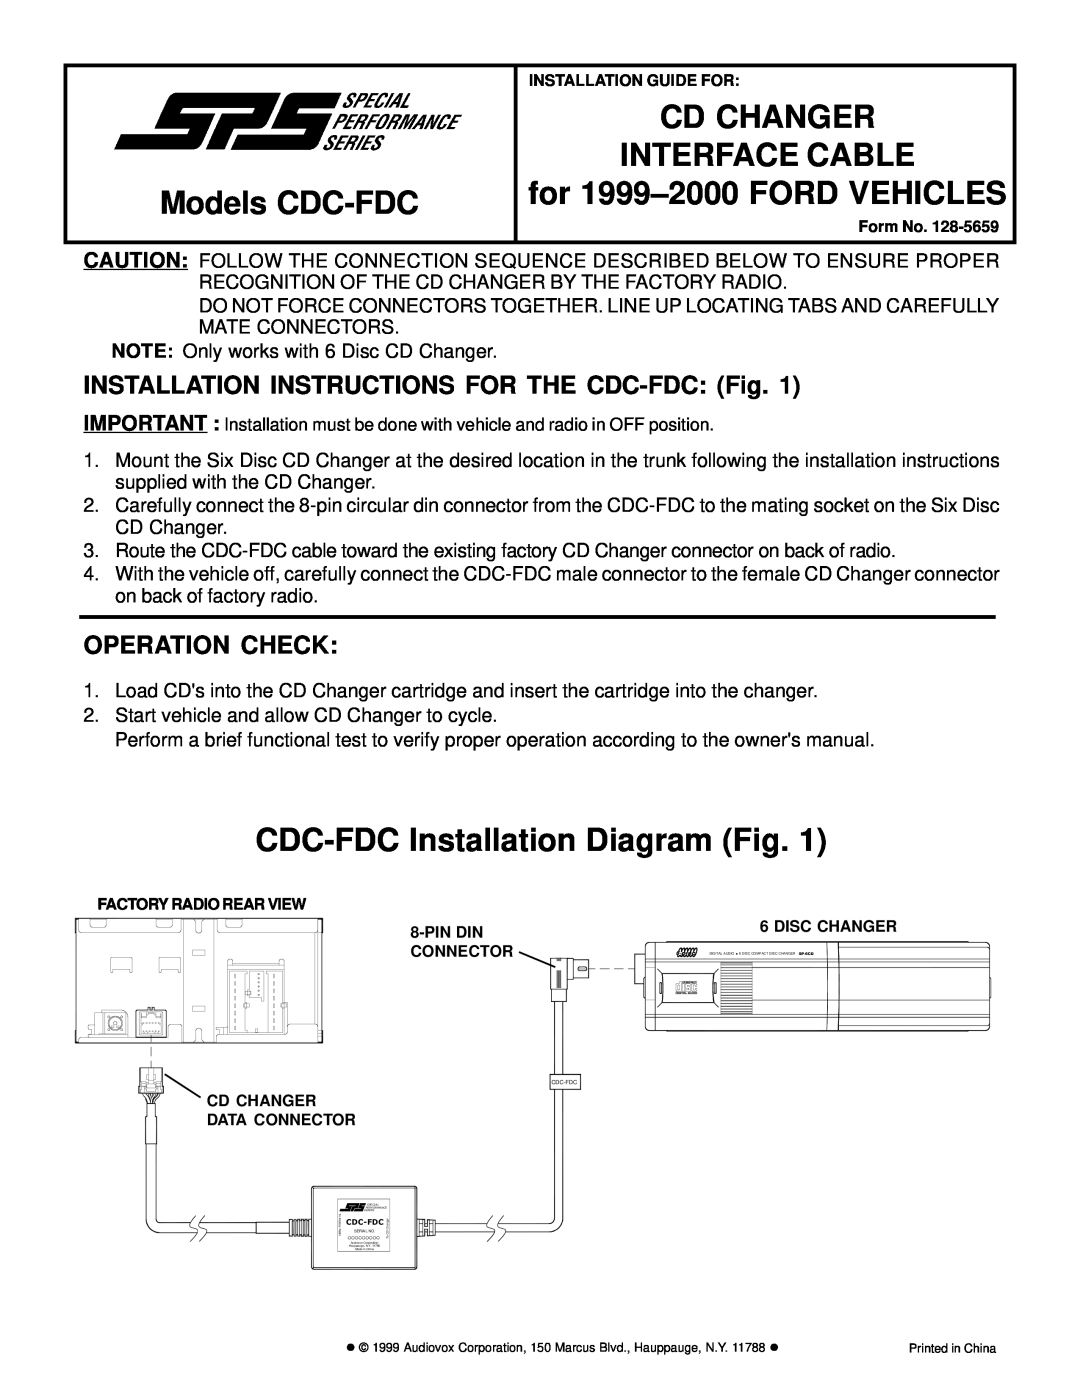 Audiovox installation instructions Cd Changer, Models CDC-FDC, CDC-FDC Installation Diagram Fig, Interface Cable 